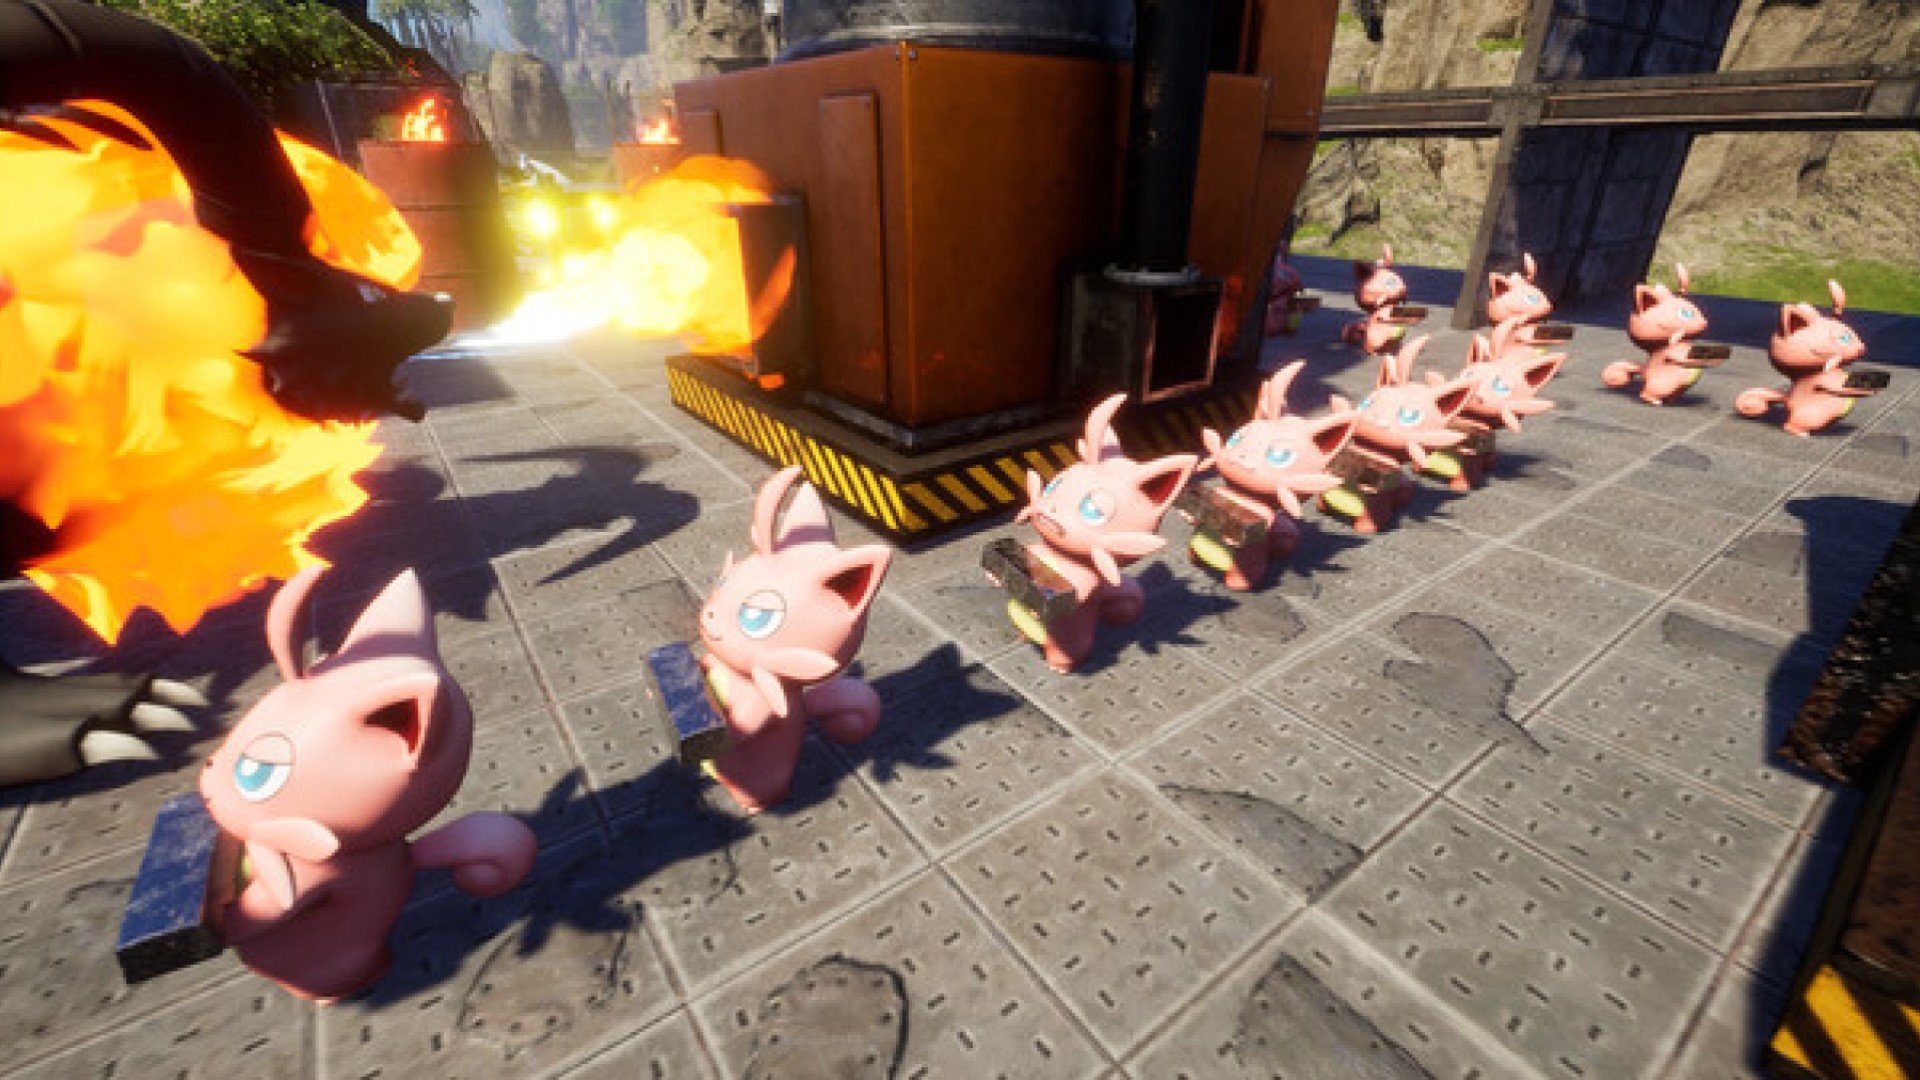 A line of Pals carrying objects in Palworld. In the background, a furnace burns.